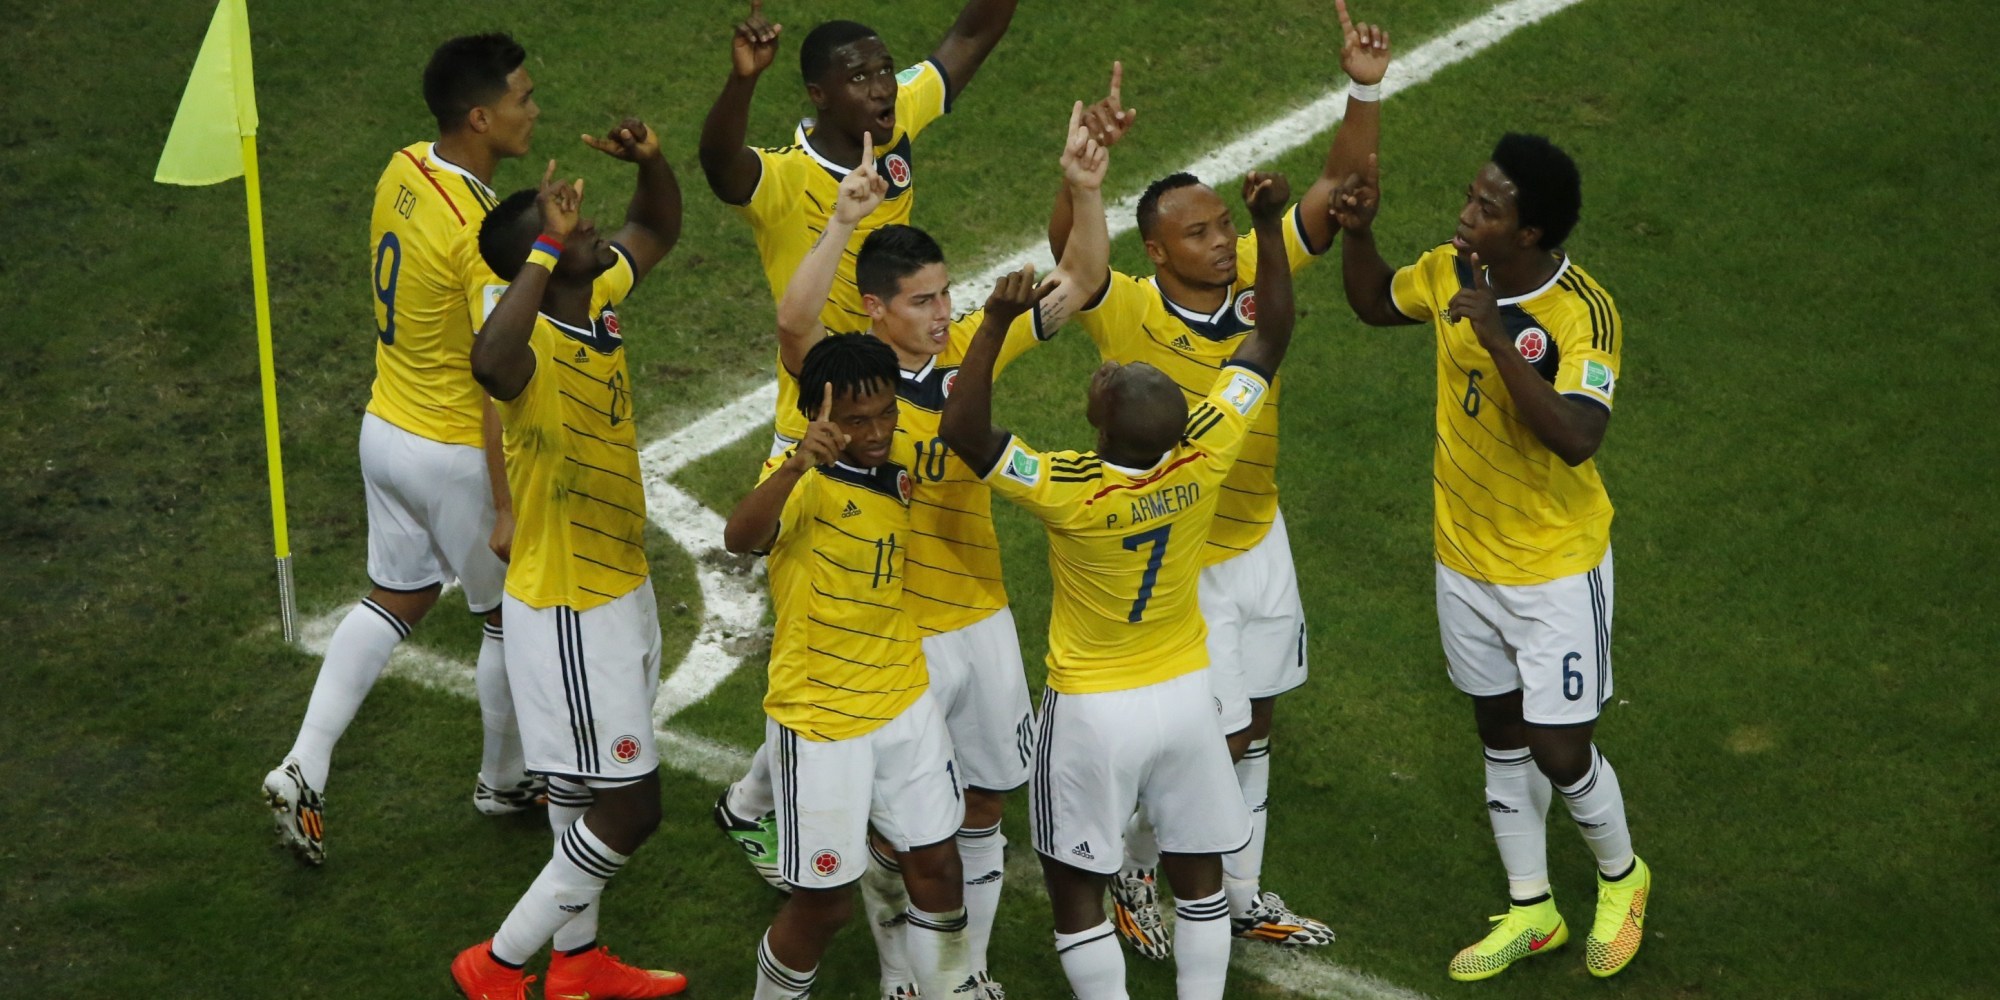 The Meaning Behind Colombia's World Cup Dance | HuffPost